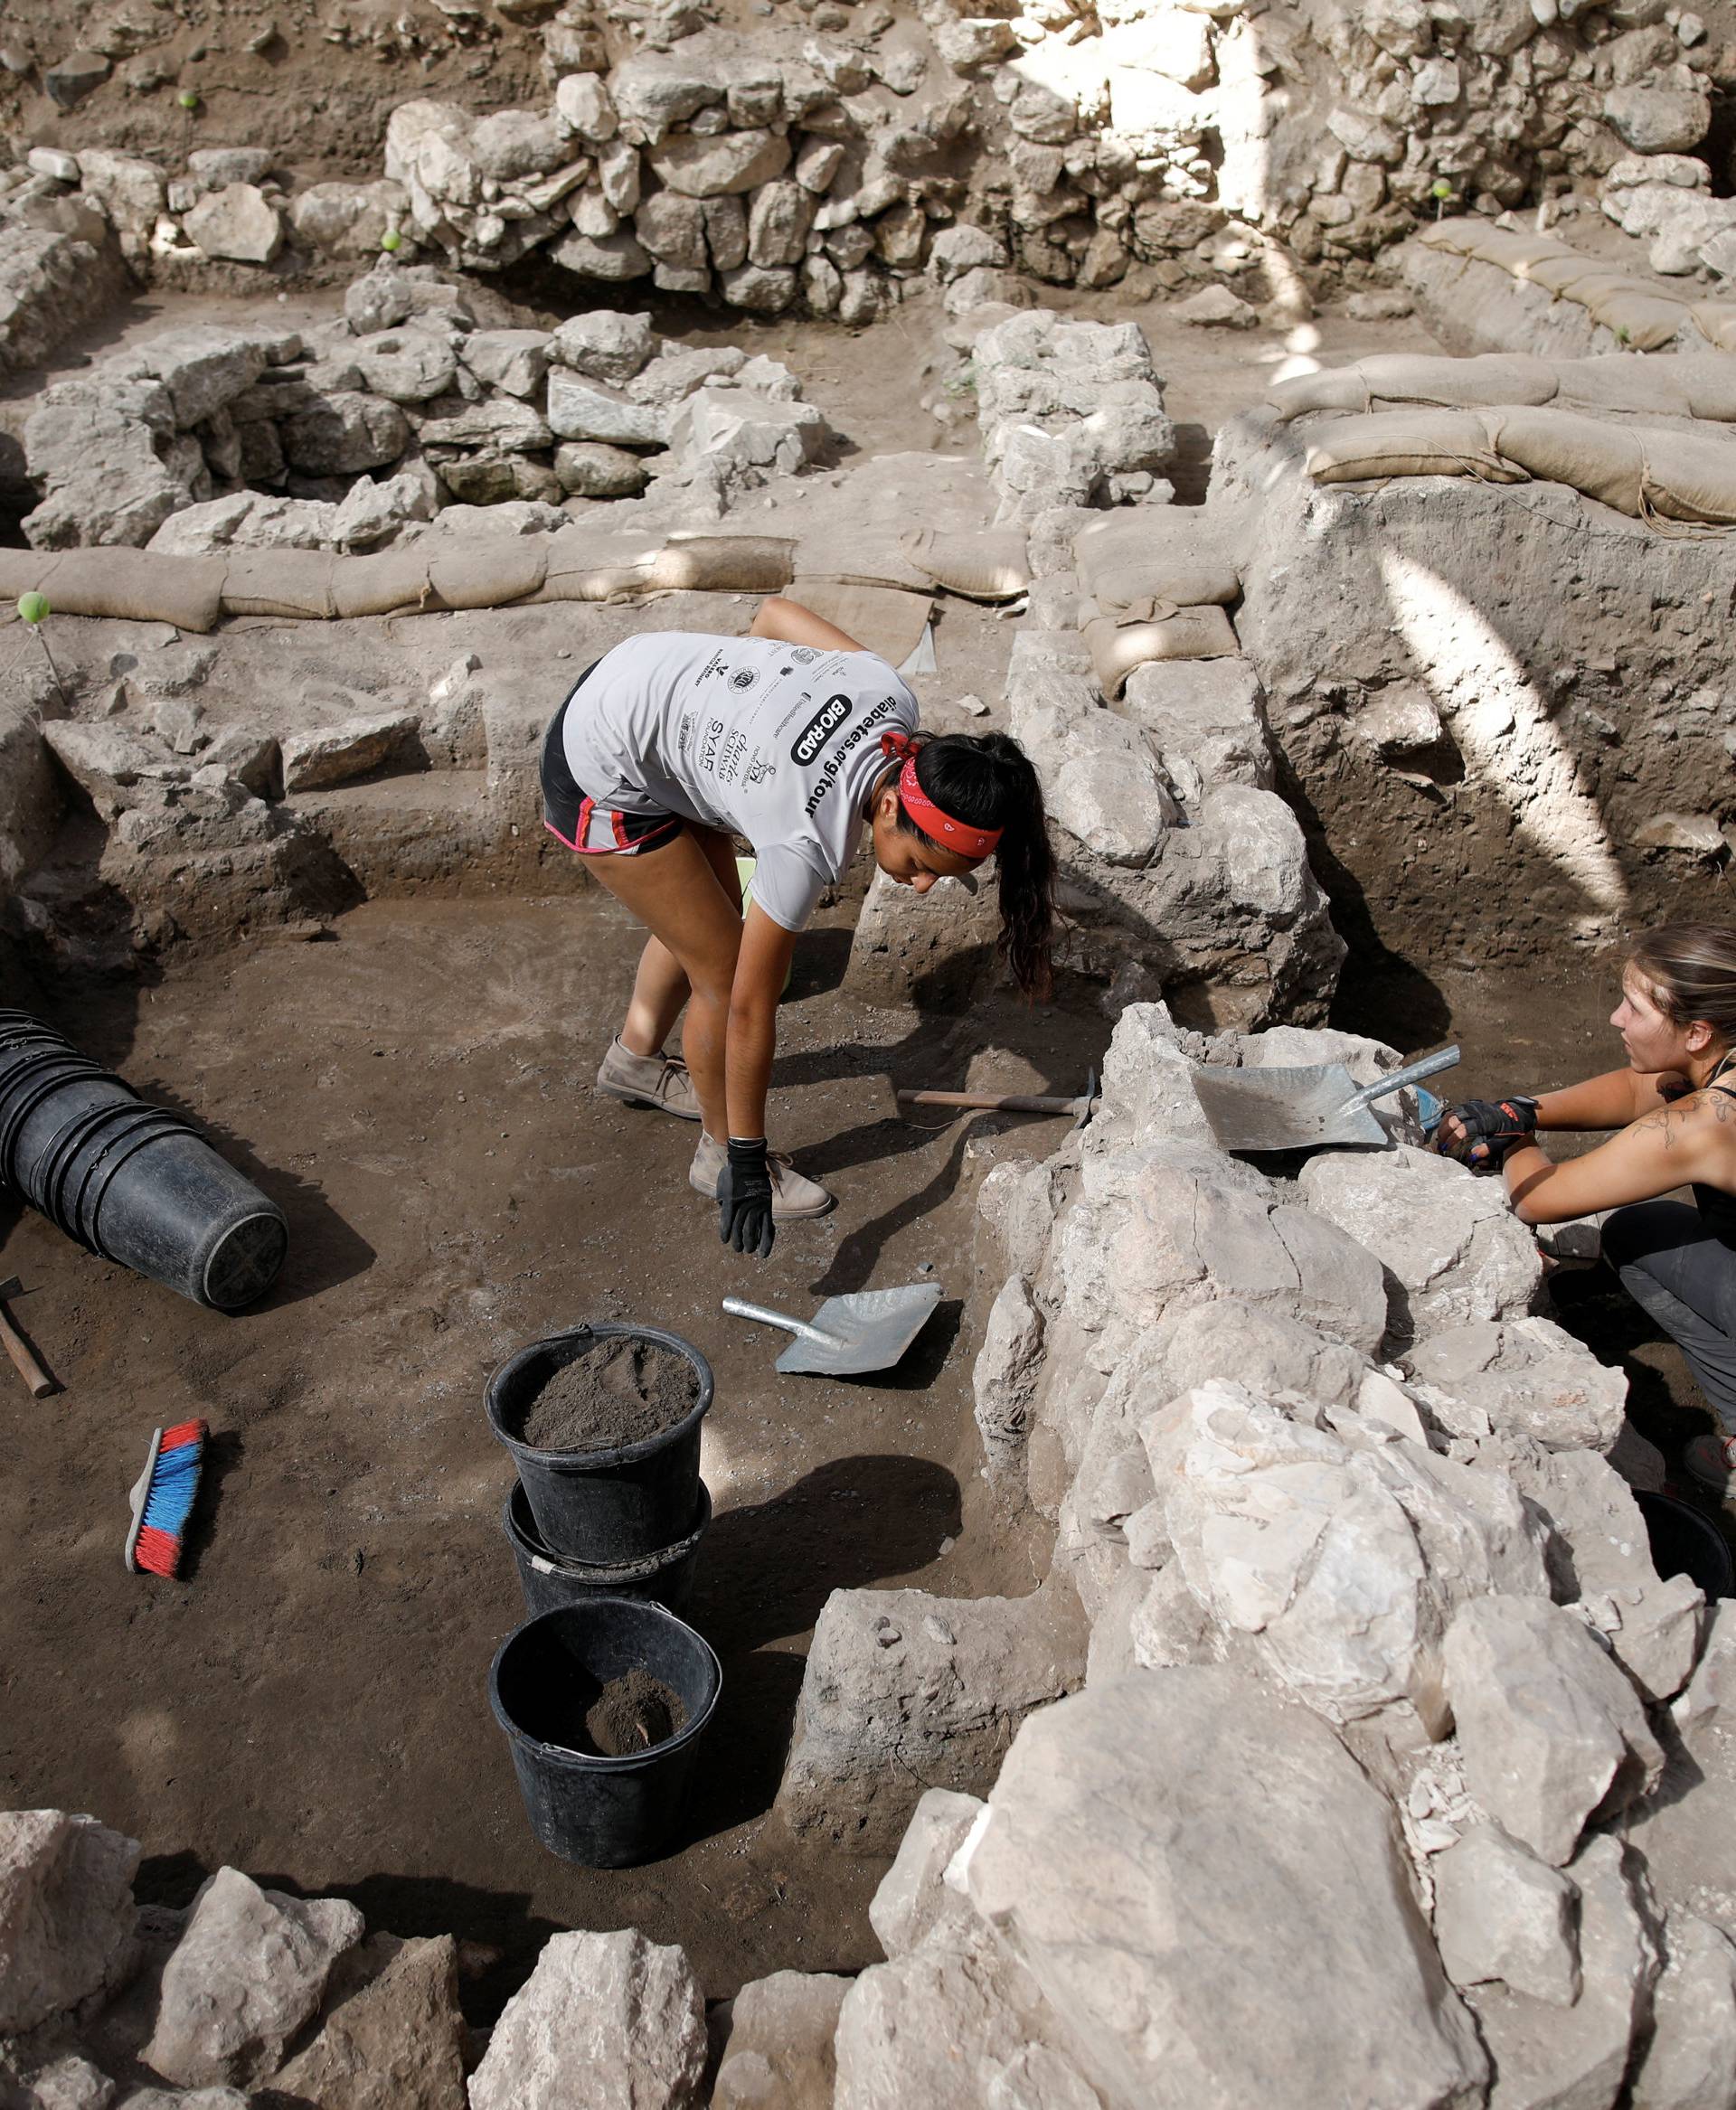 Workers dig at the Tel Megiddo Archaeological site